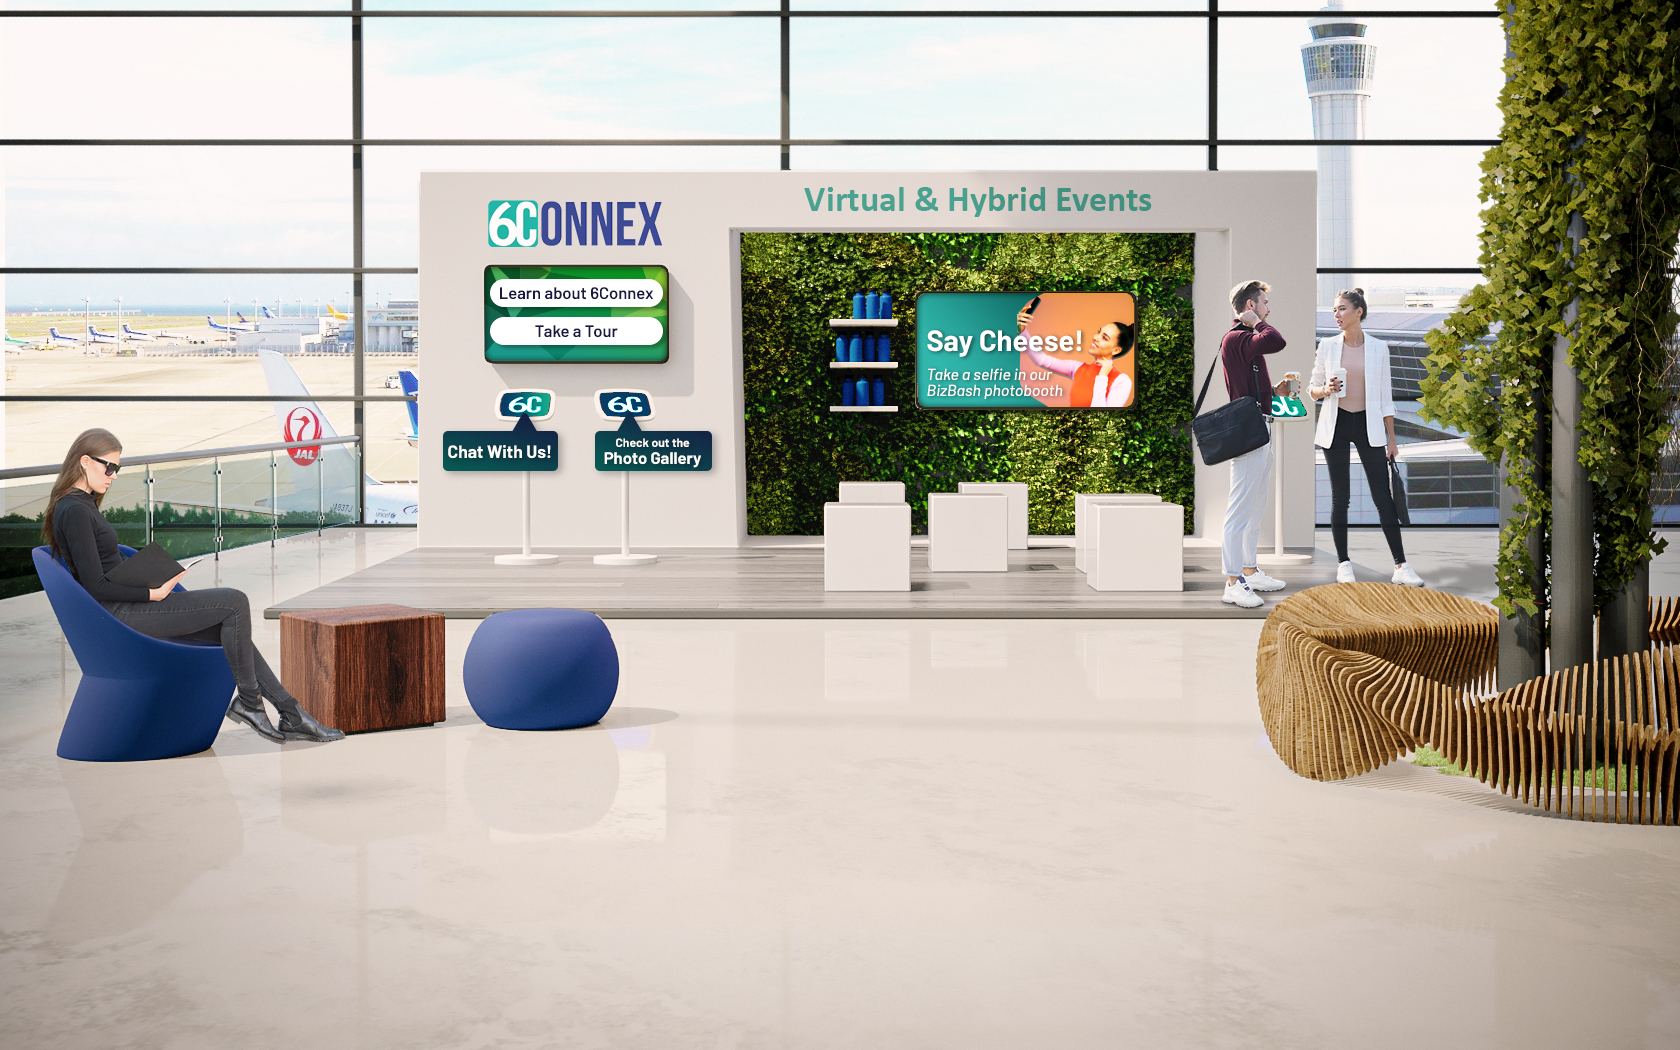 6connex virtual and hybrid events trade show booth